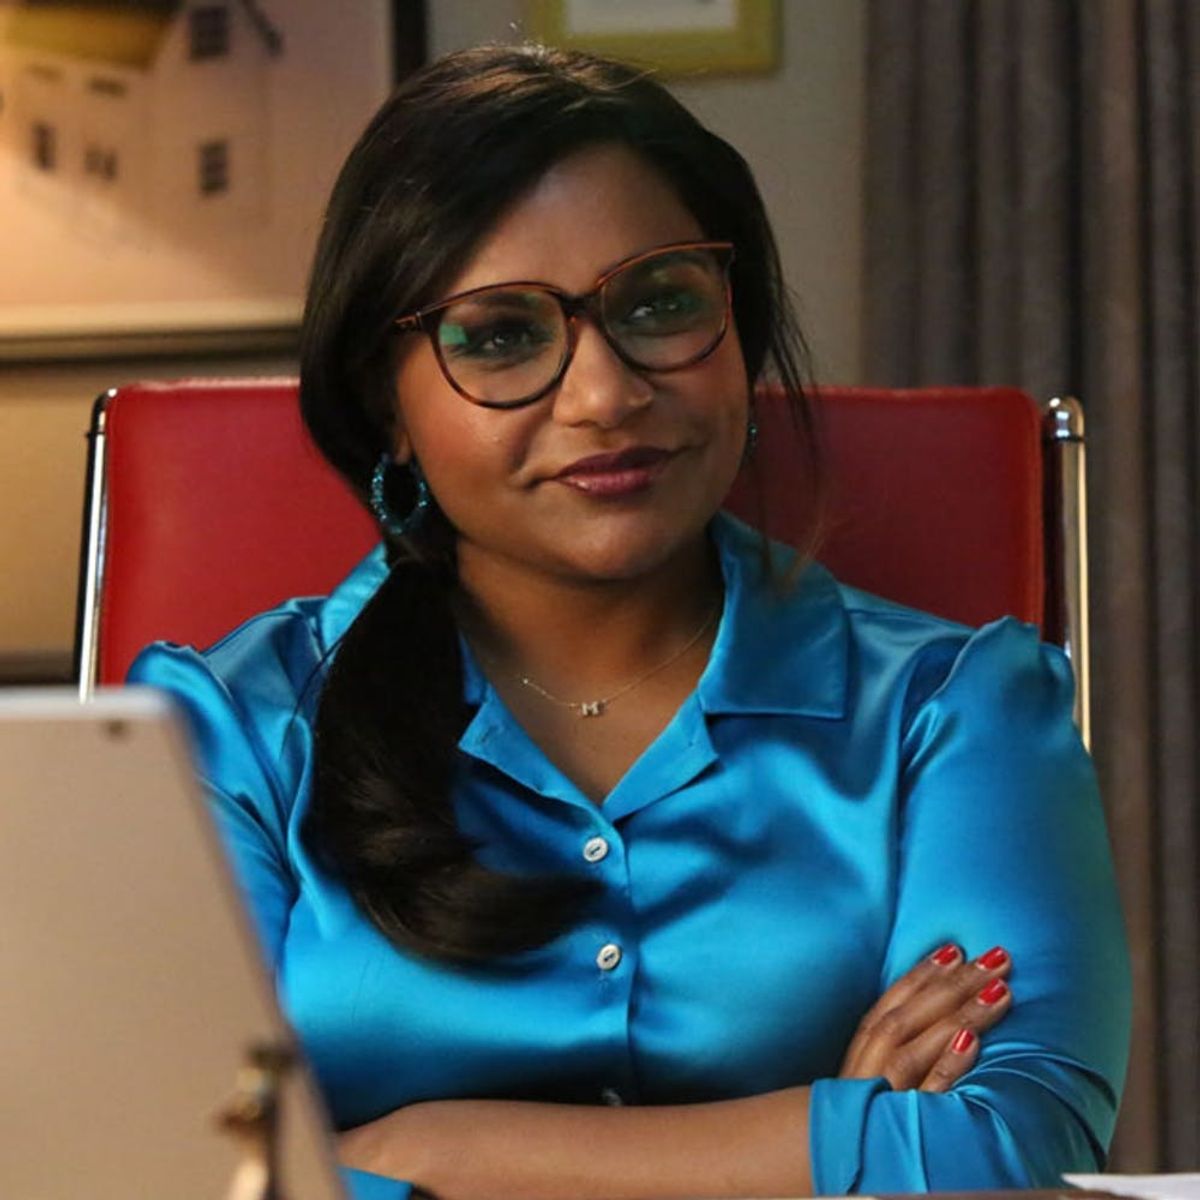 Fashion Lovers Need to Hear the Story Behind Mindy Kaling’s On-Screen Style